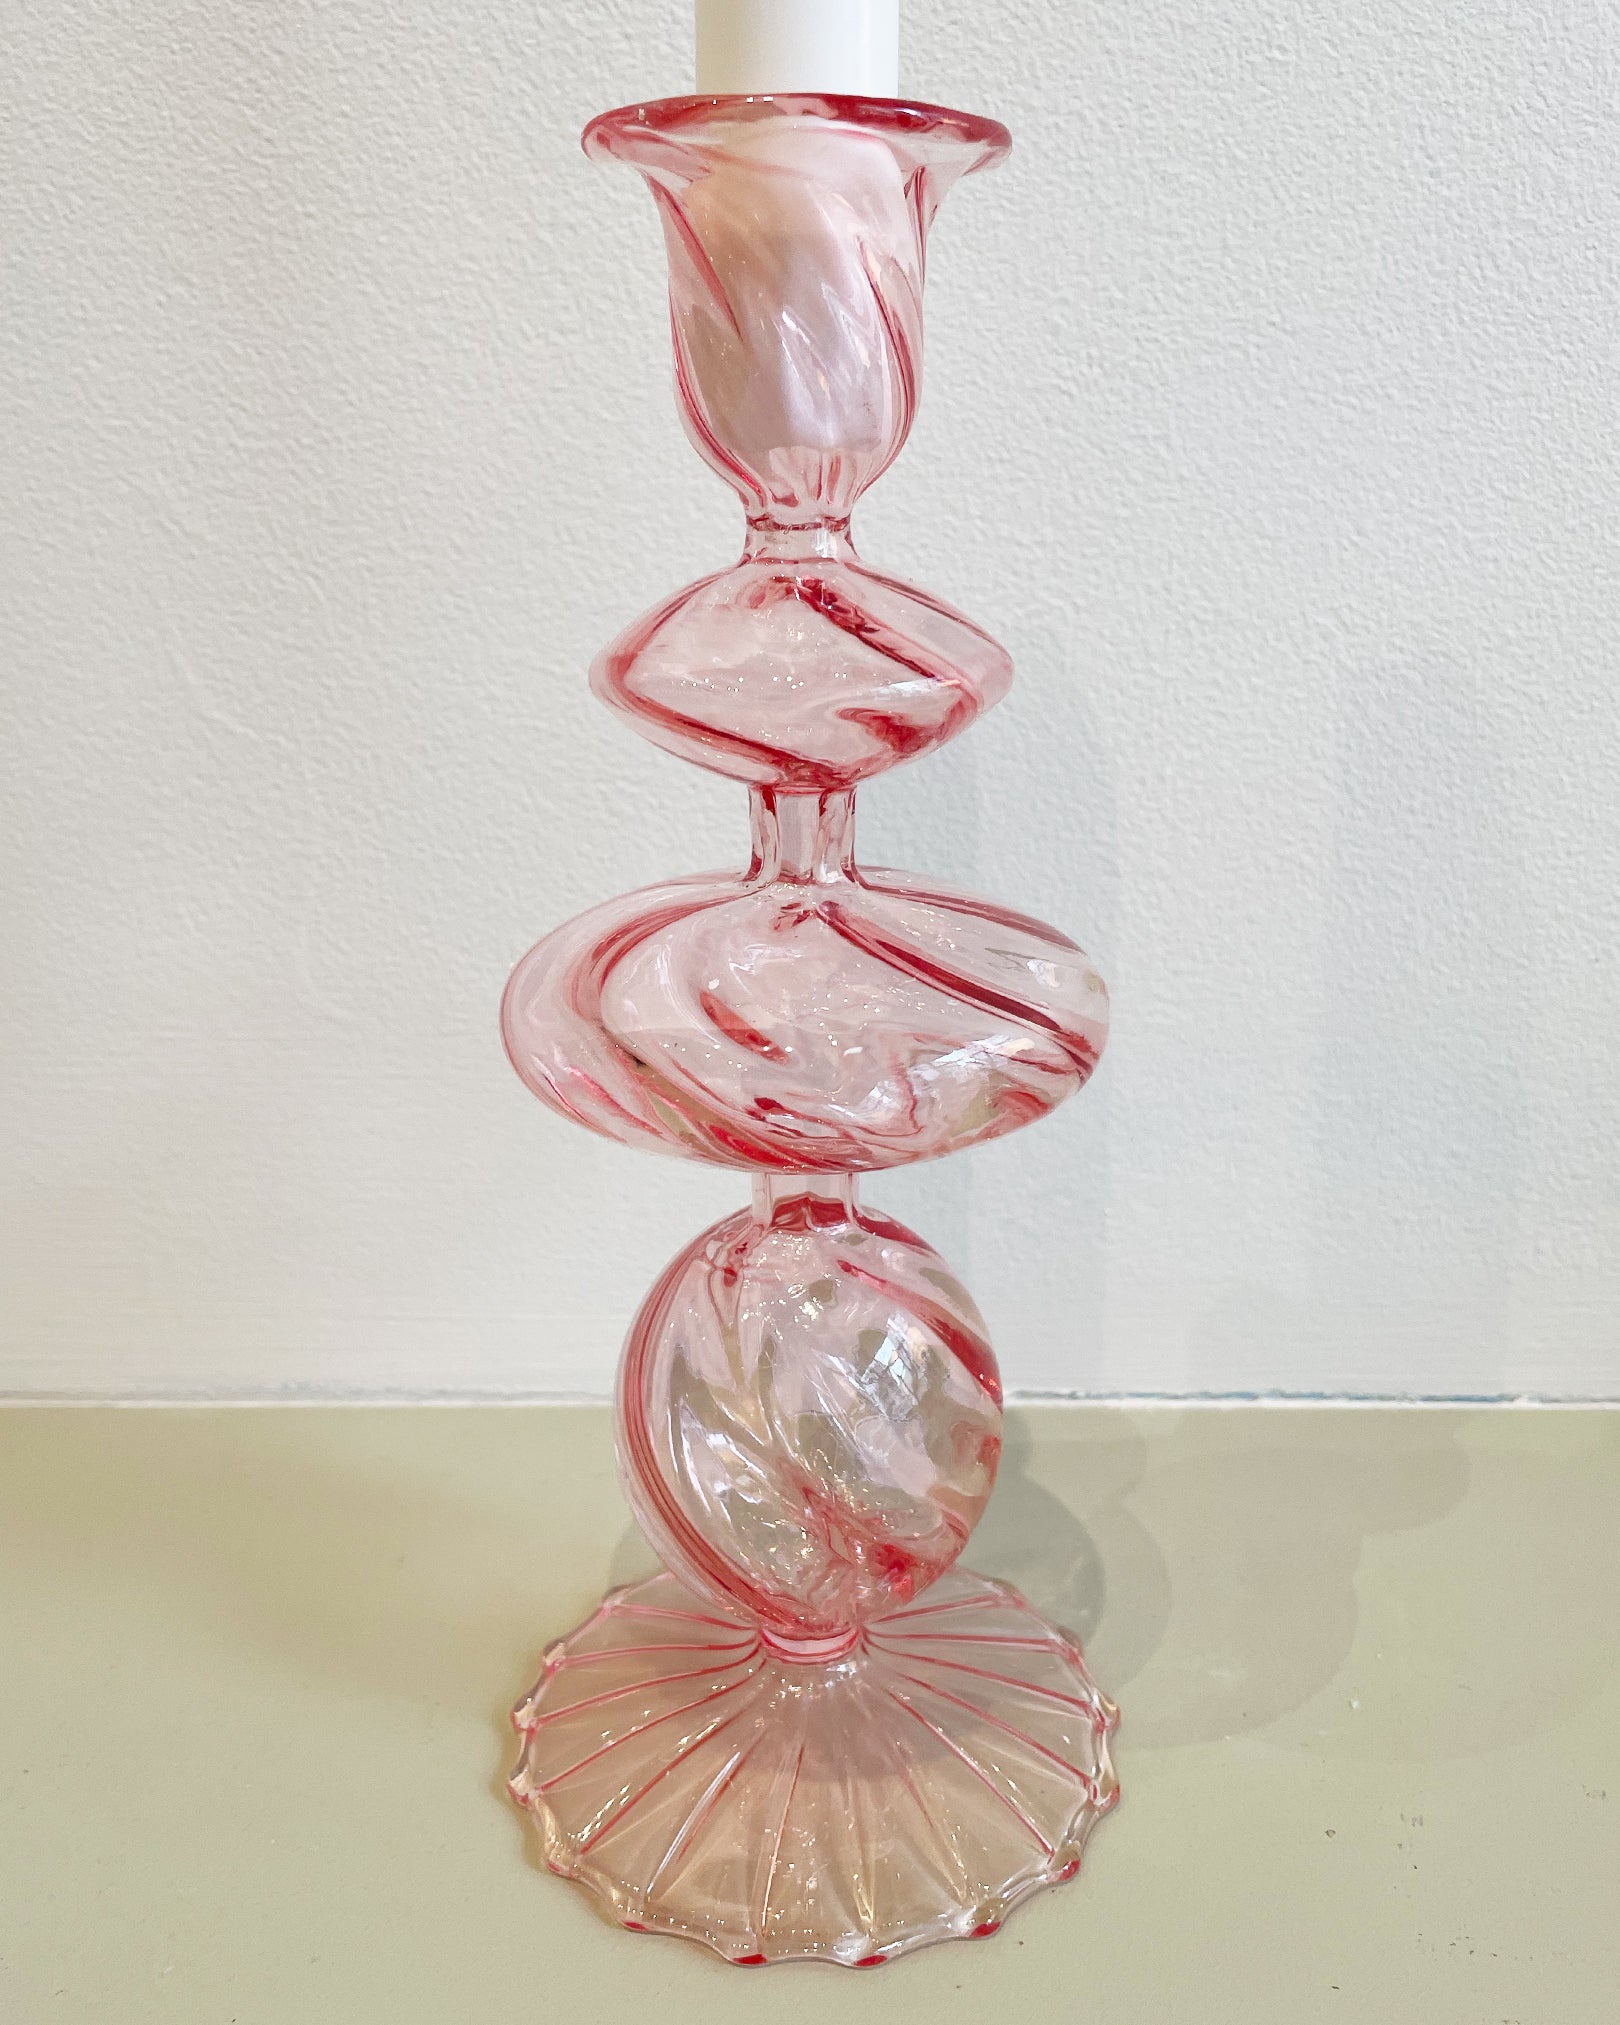 9 CHRISTOPHER Finn Glass Candlestick in Twisted Pink available at Lahn.shop